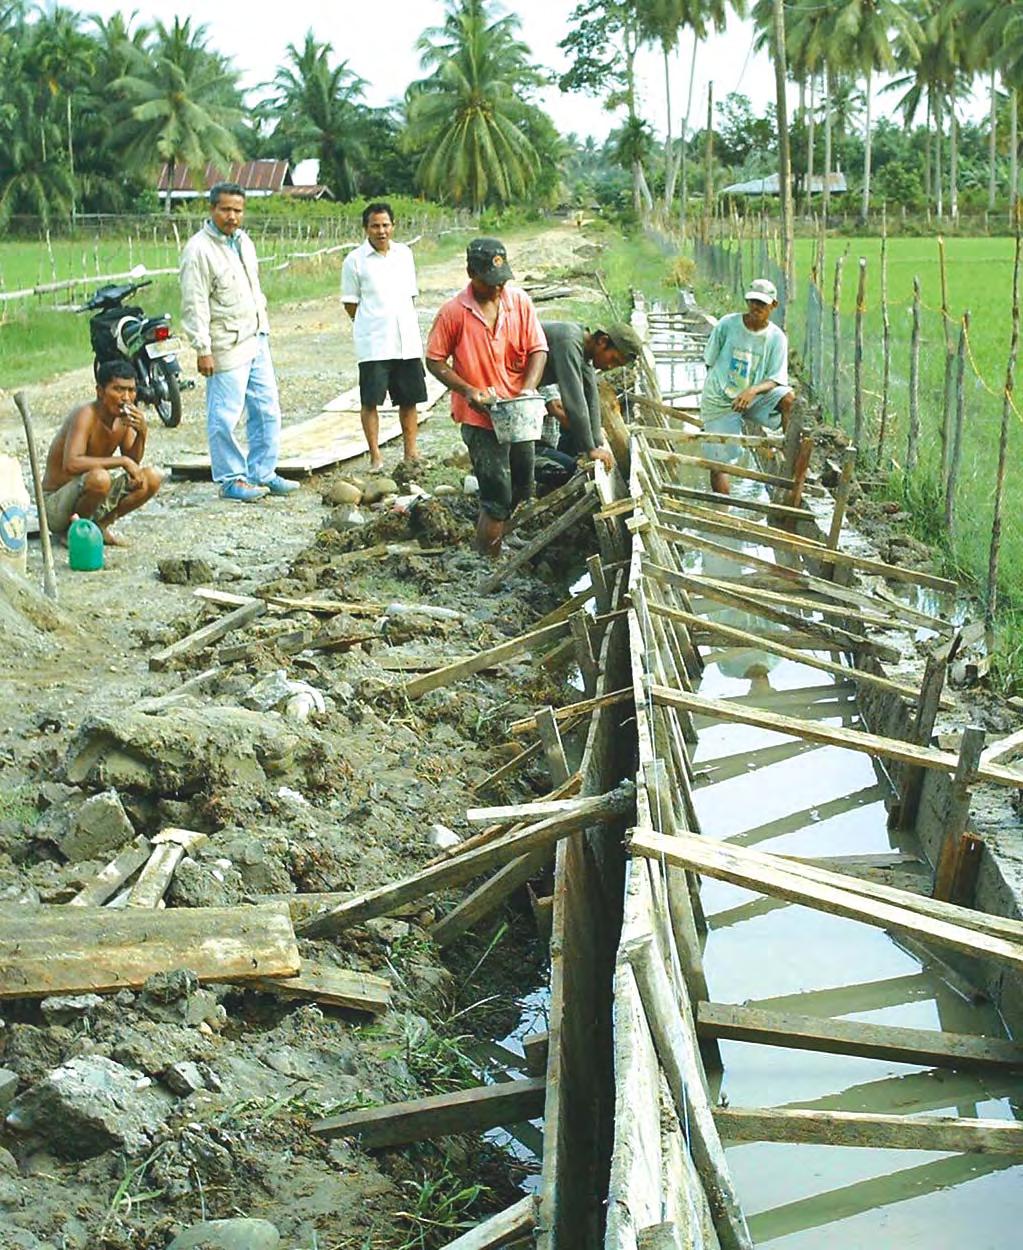 Irrigation canal built by the community The community constructs an irrigation system for Senebok Aceh village in the Bendahara sub-district with a minimum budget,